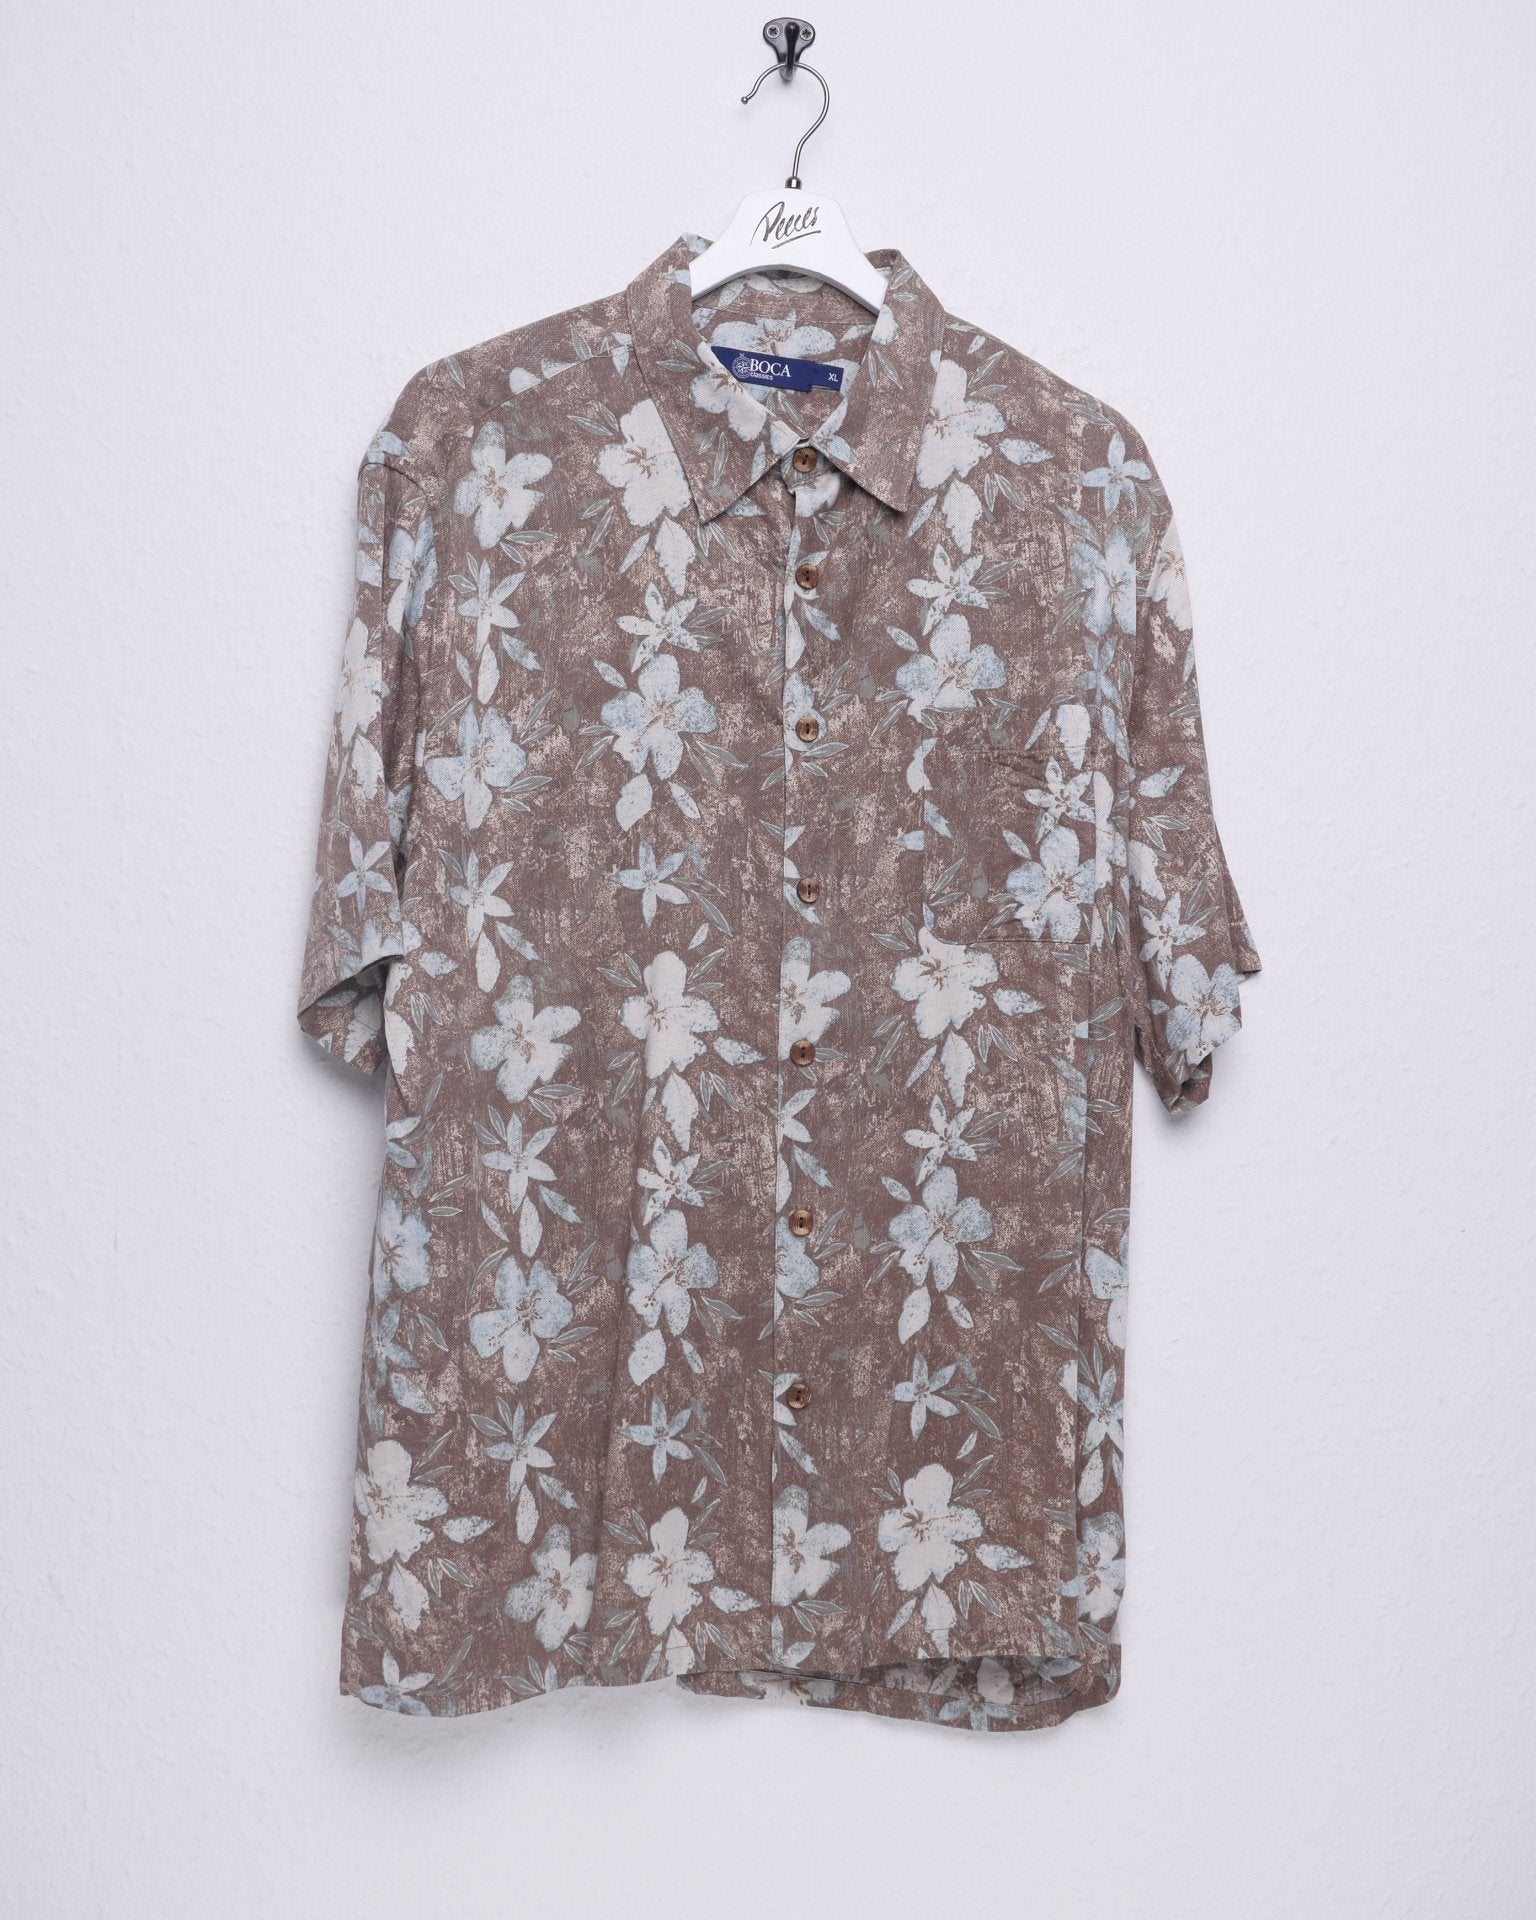 'Flowers' printed Pattern two toned S/S Hemd - Peeces